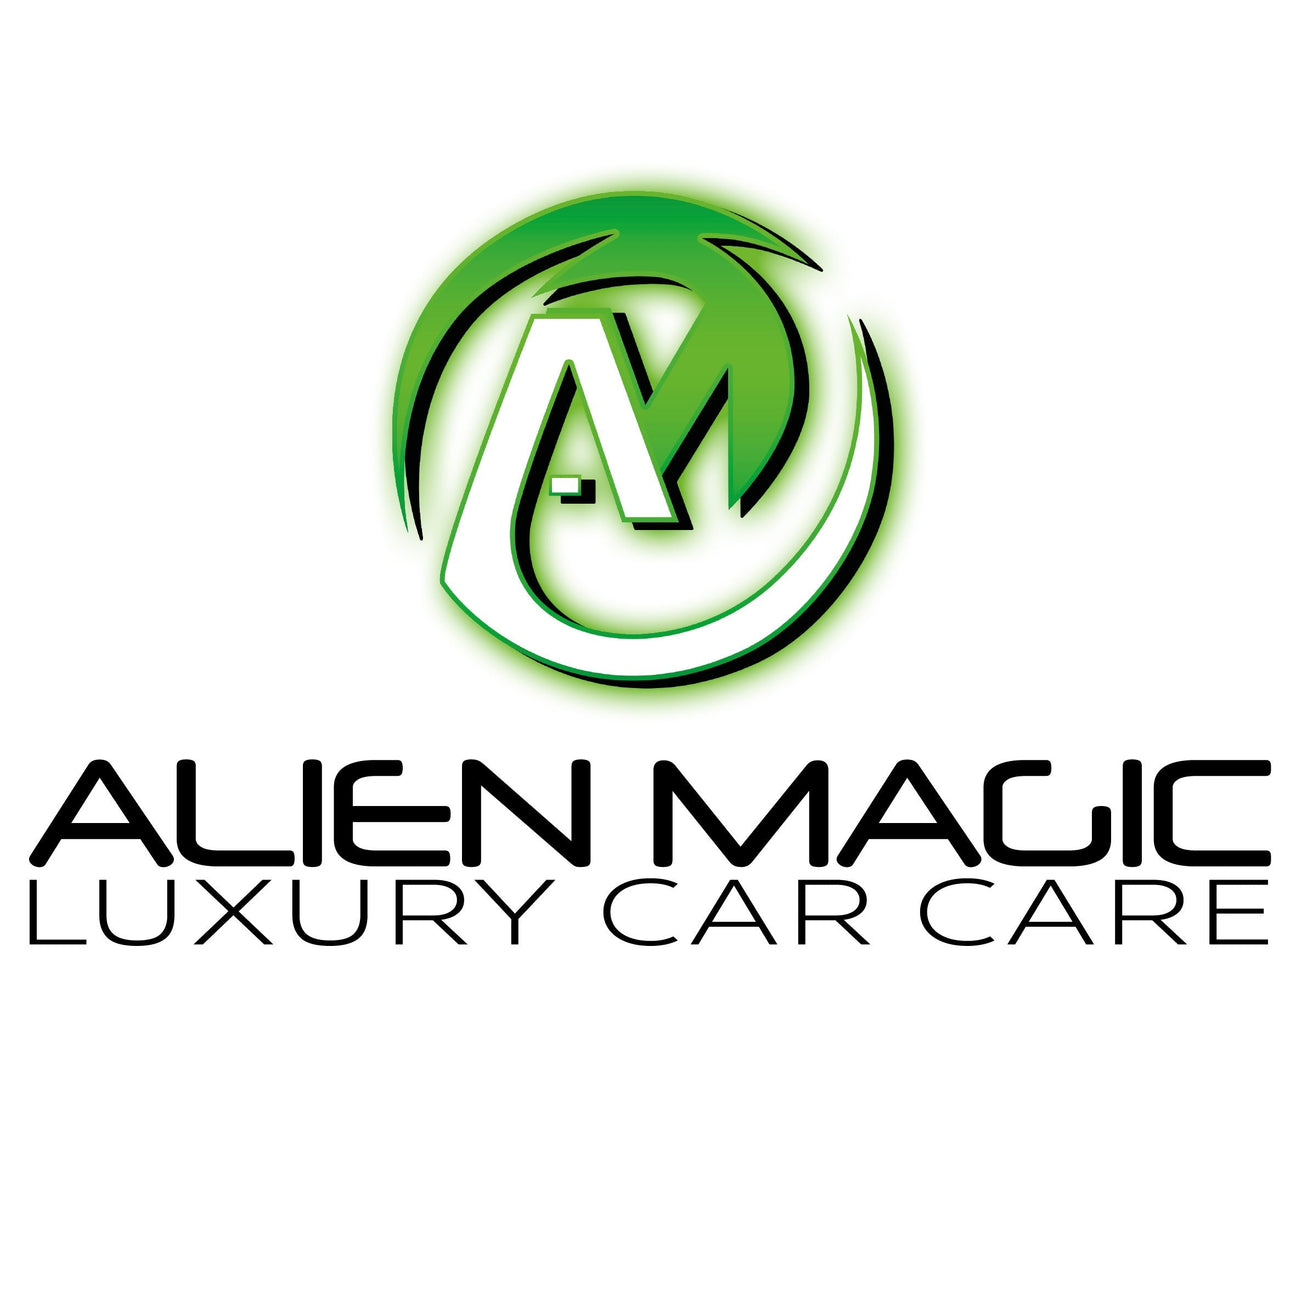 Alien Magic Car Care | The Funkiest Car Cleaning Products Around